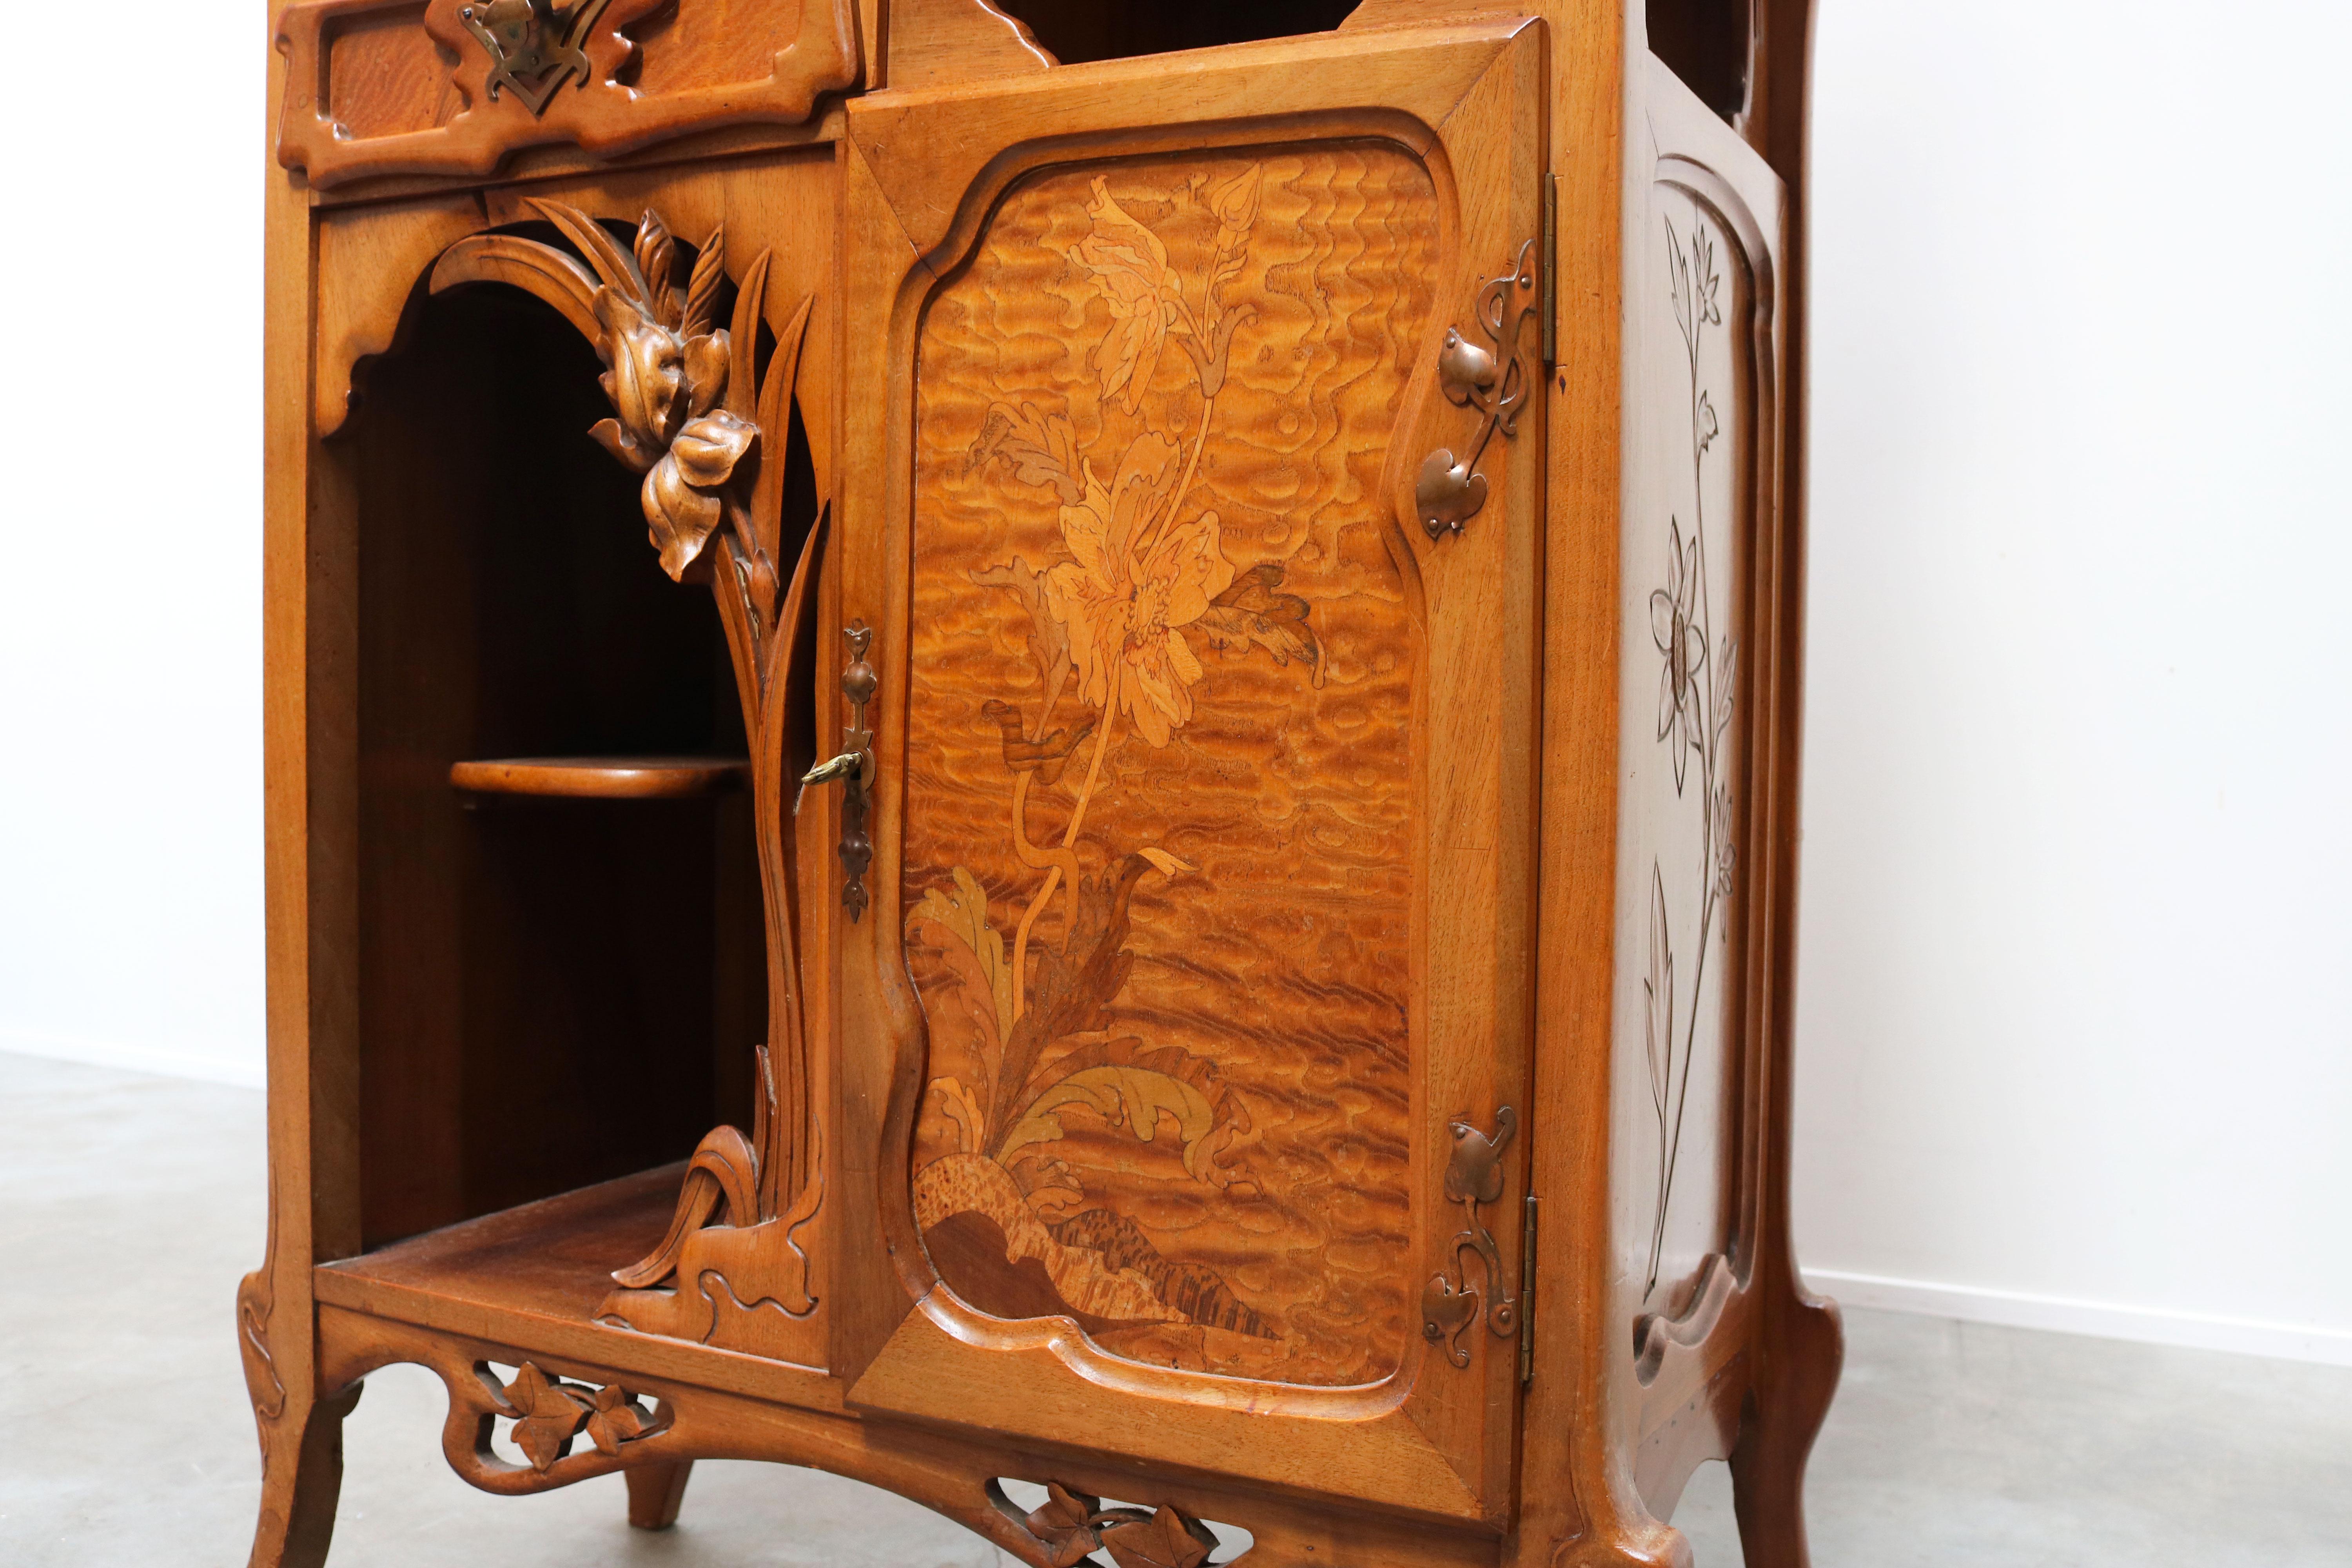 Glass Gorgeous French Art Nouveau Cabinet / Display Cabinet with Marquetry, 1890